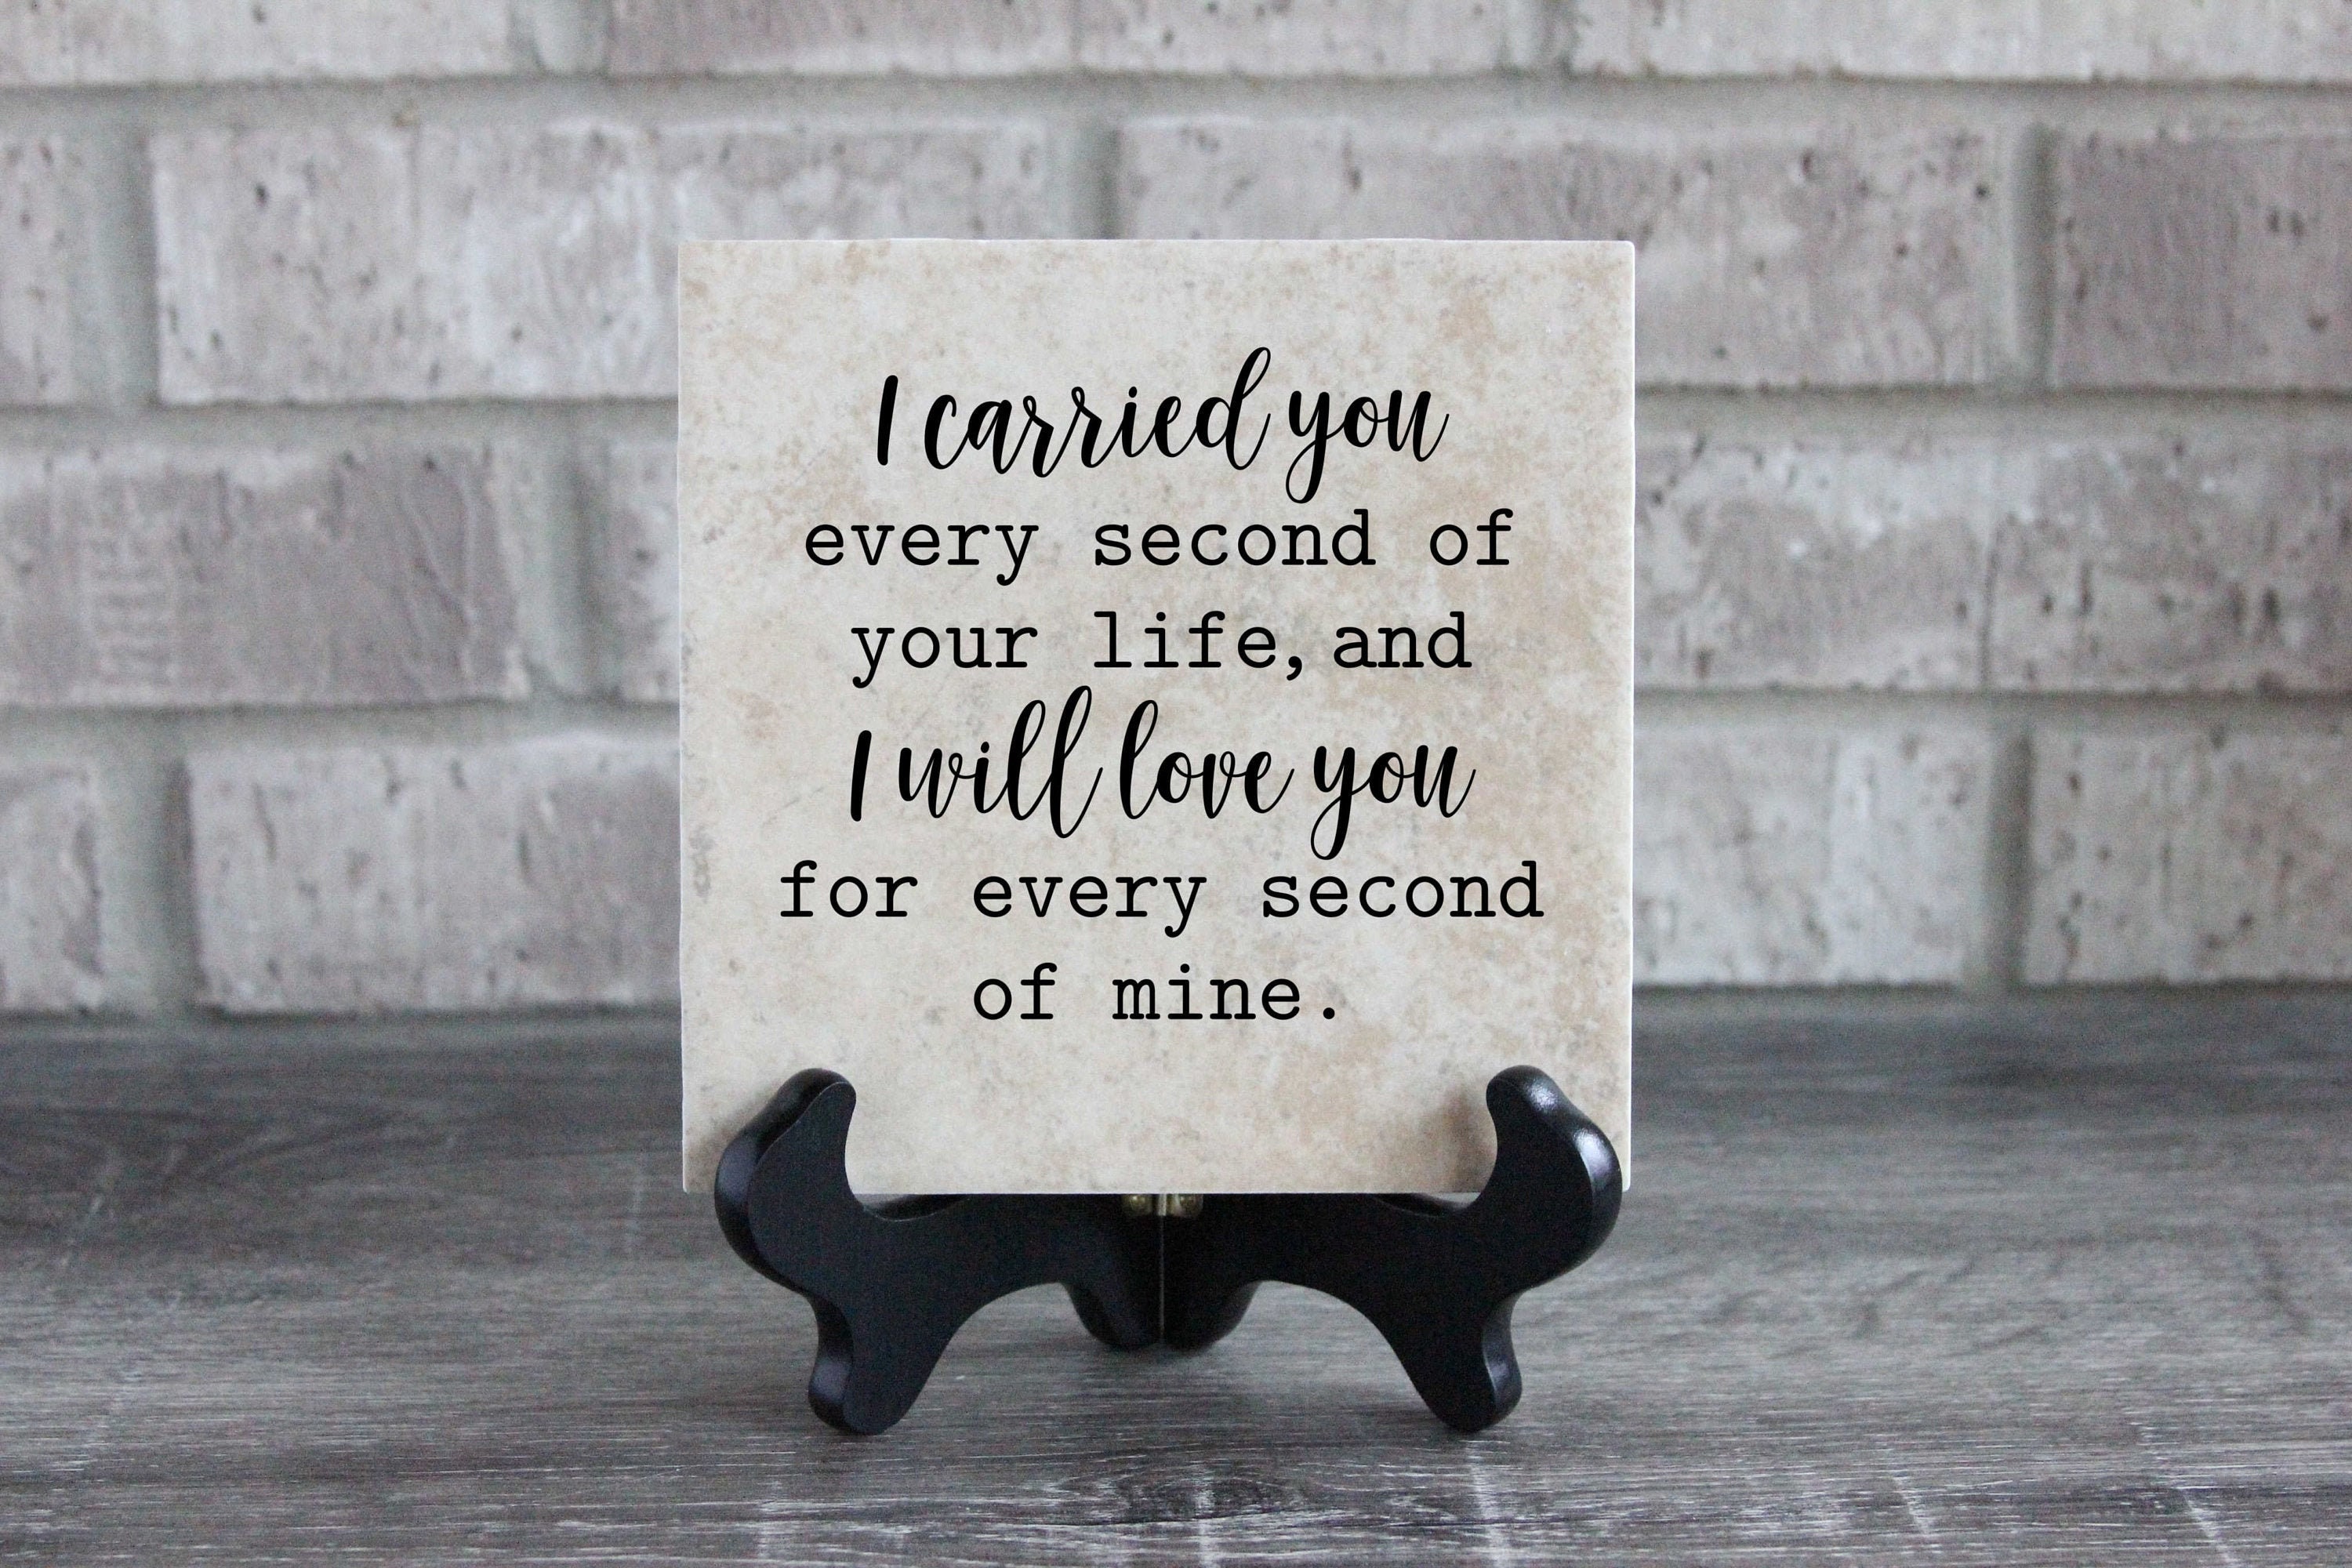 Memorial Tile i Carried You Every Second of Your - Etsy